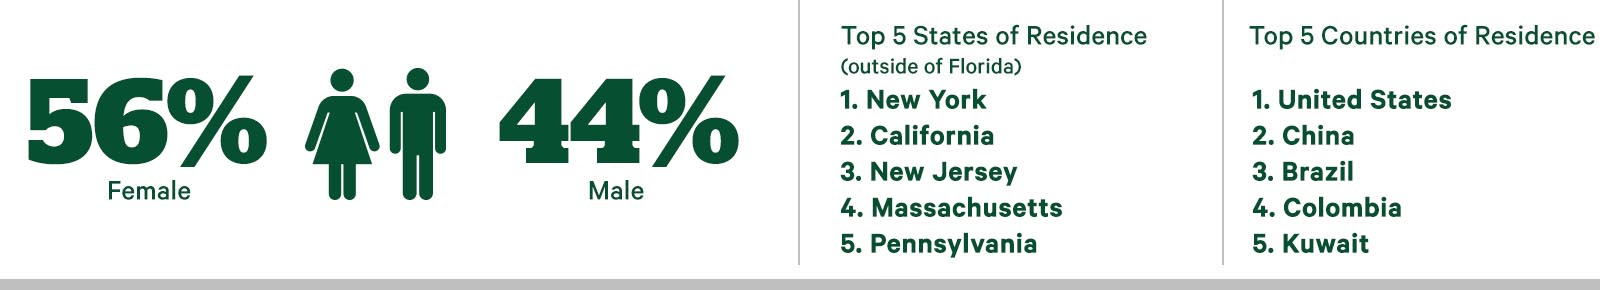 54% female, 46% male, Top 5 States of Residence (outside of Florida) 1. New York 2. New Jersey 3. California 4. Massachusetts 5. Illinois, Top 5 Countries of Residence - 1.United States 2. China 3. Ecuador 4. Brazil  5. Colombia 